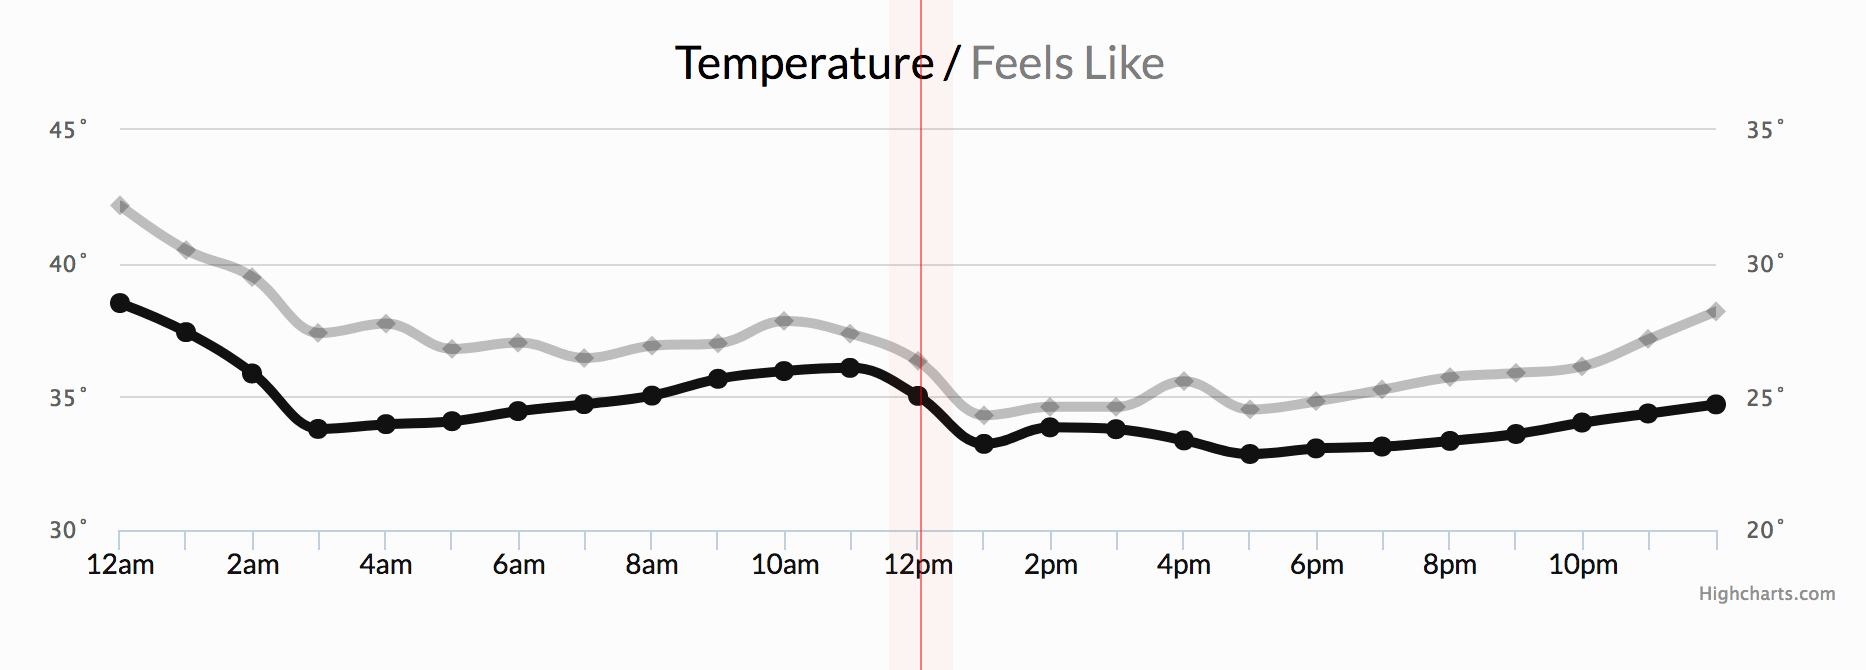 Time series data comparing actual temperature and “feels like” temperature by the hour.